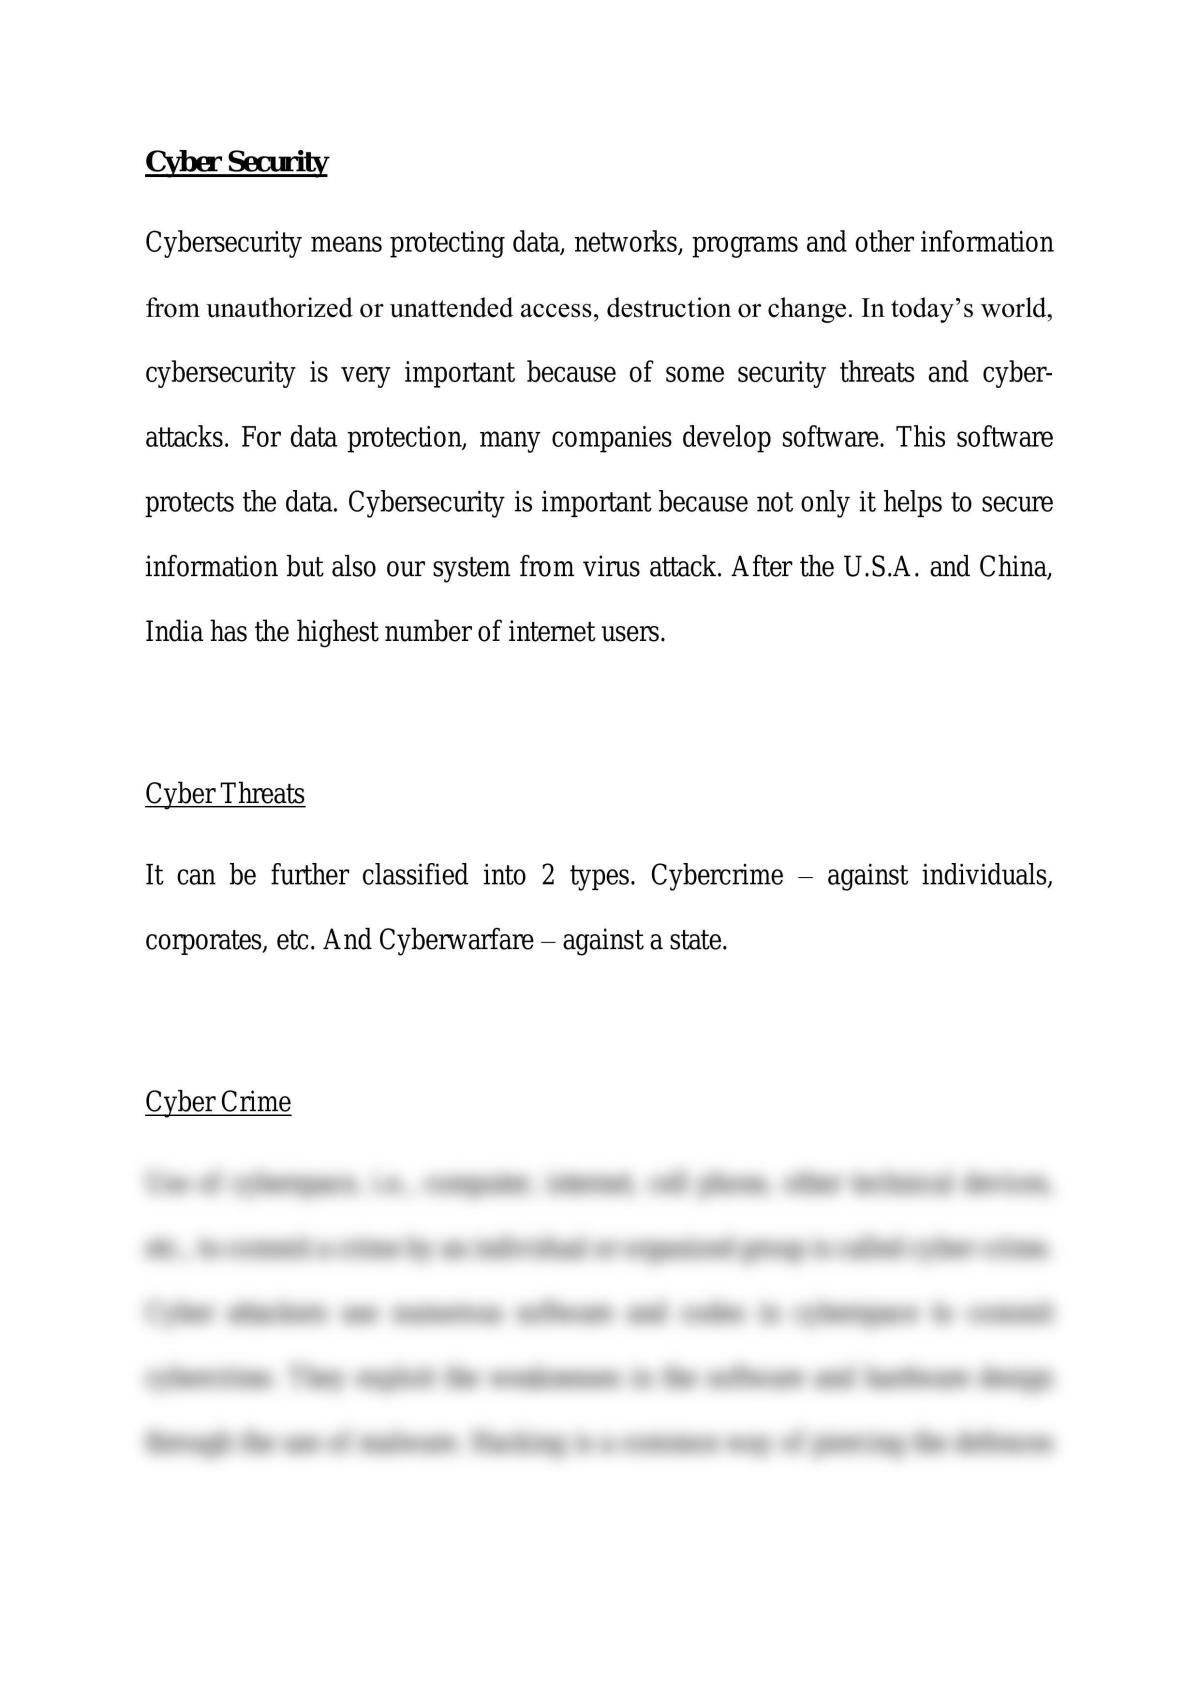 Cyber Security Essay - Page 1